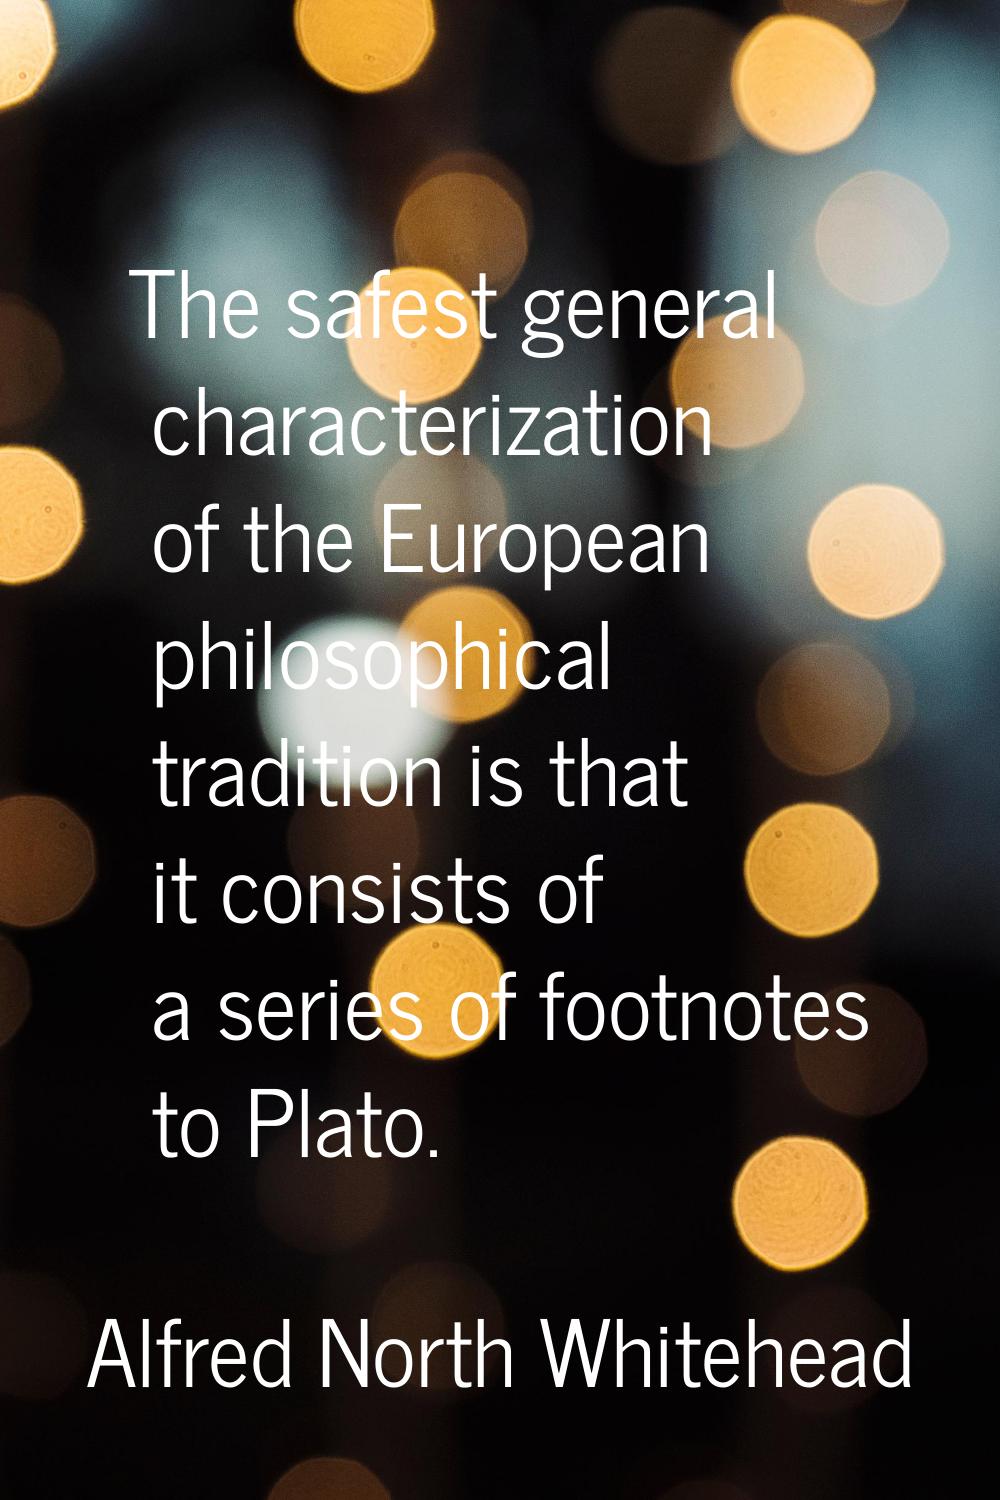 The safest general characterization of the European philosophical tradition is that it consists of 